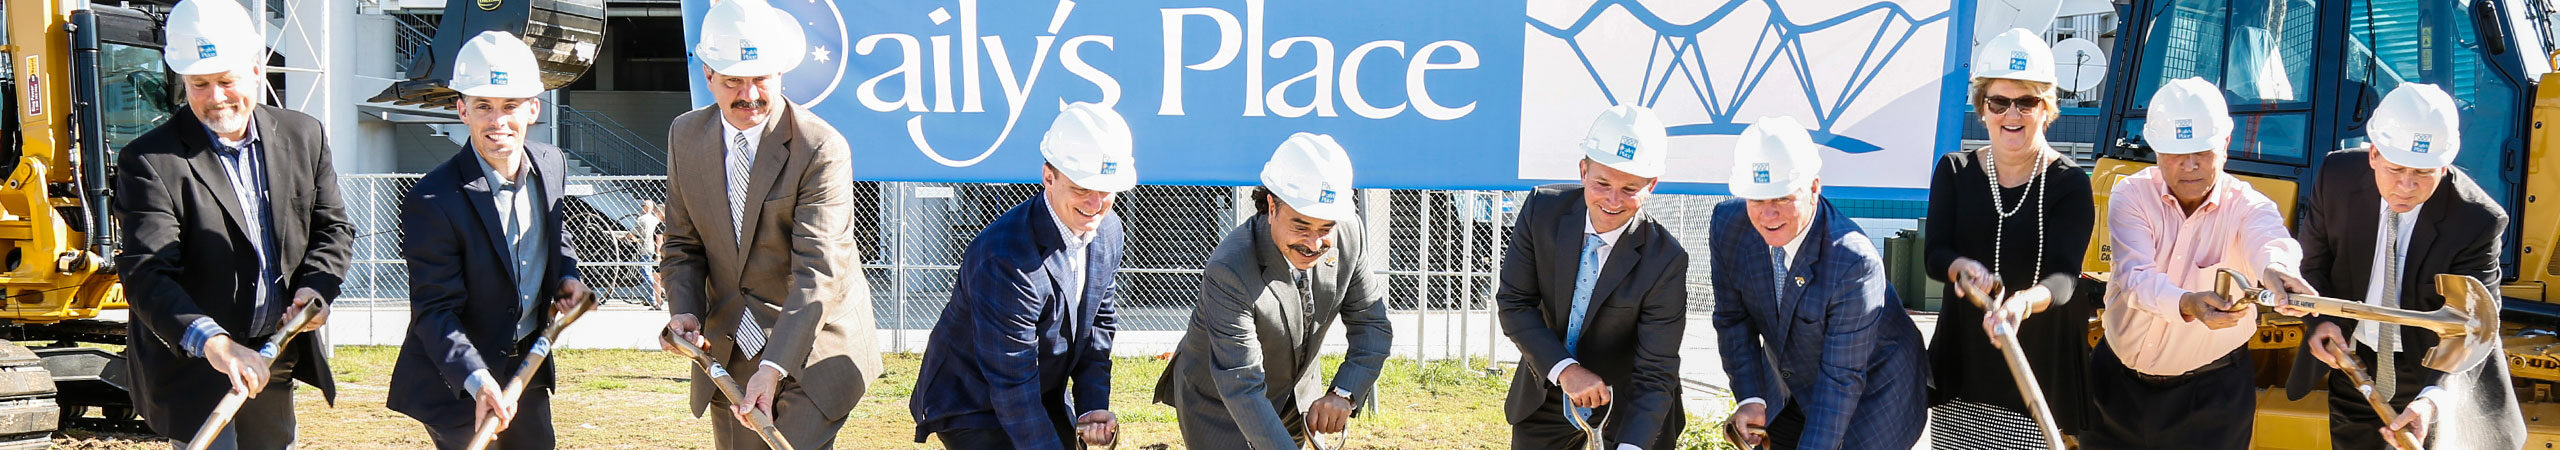 Daily’s Place Ground Breaking